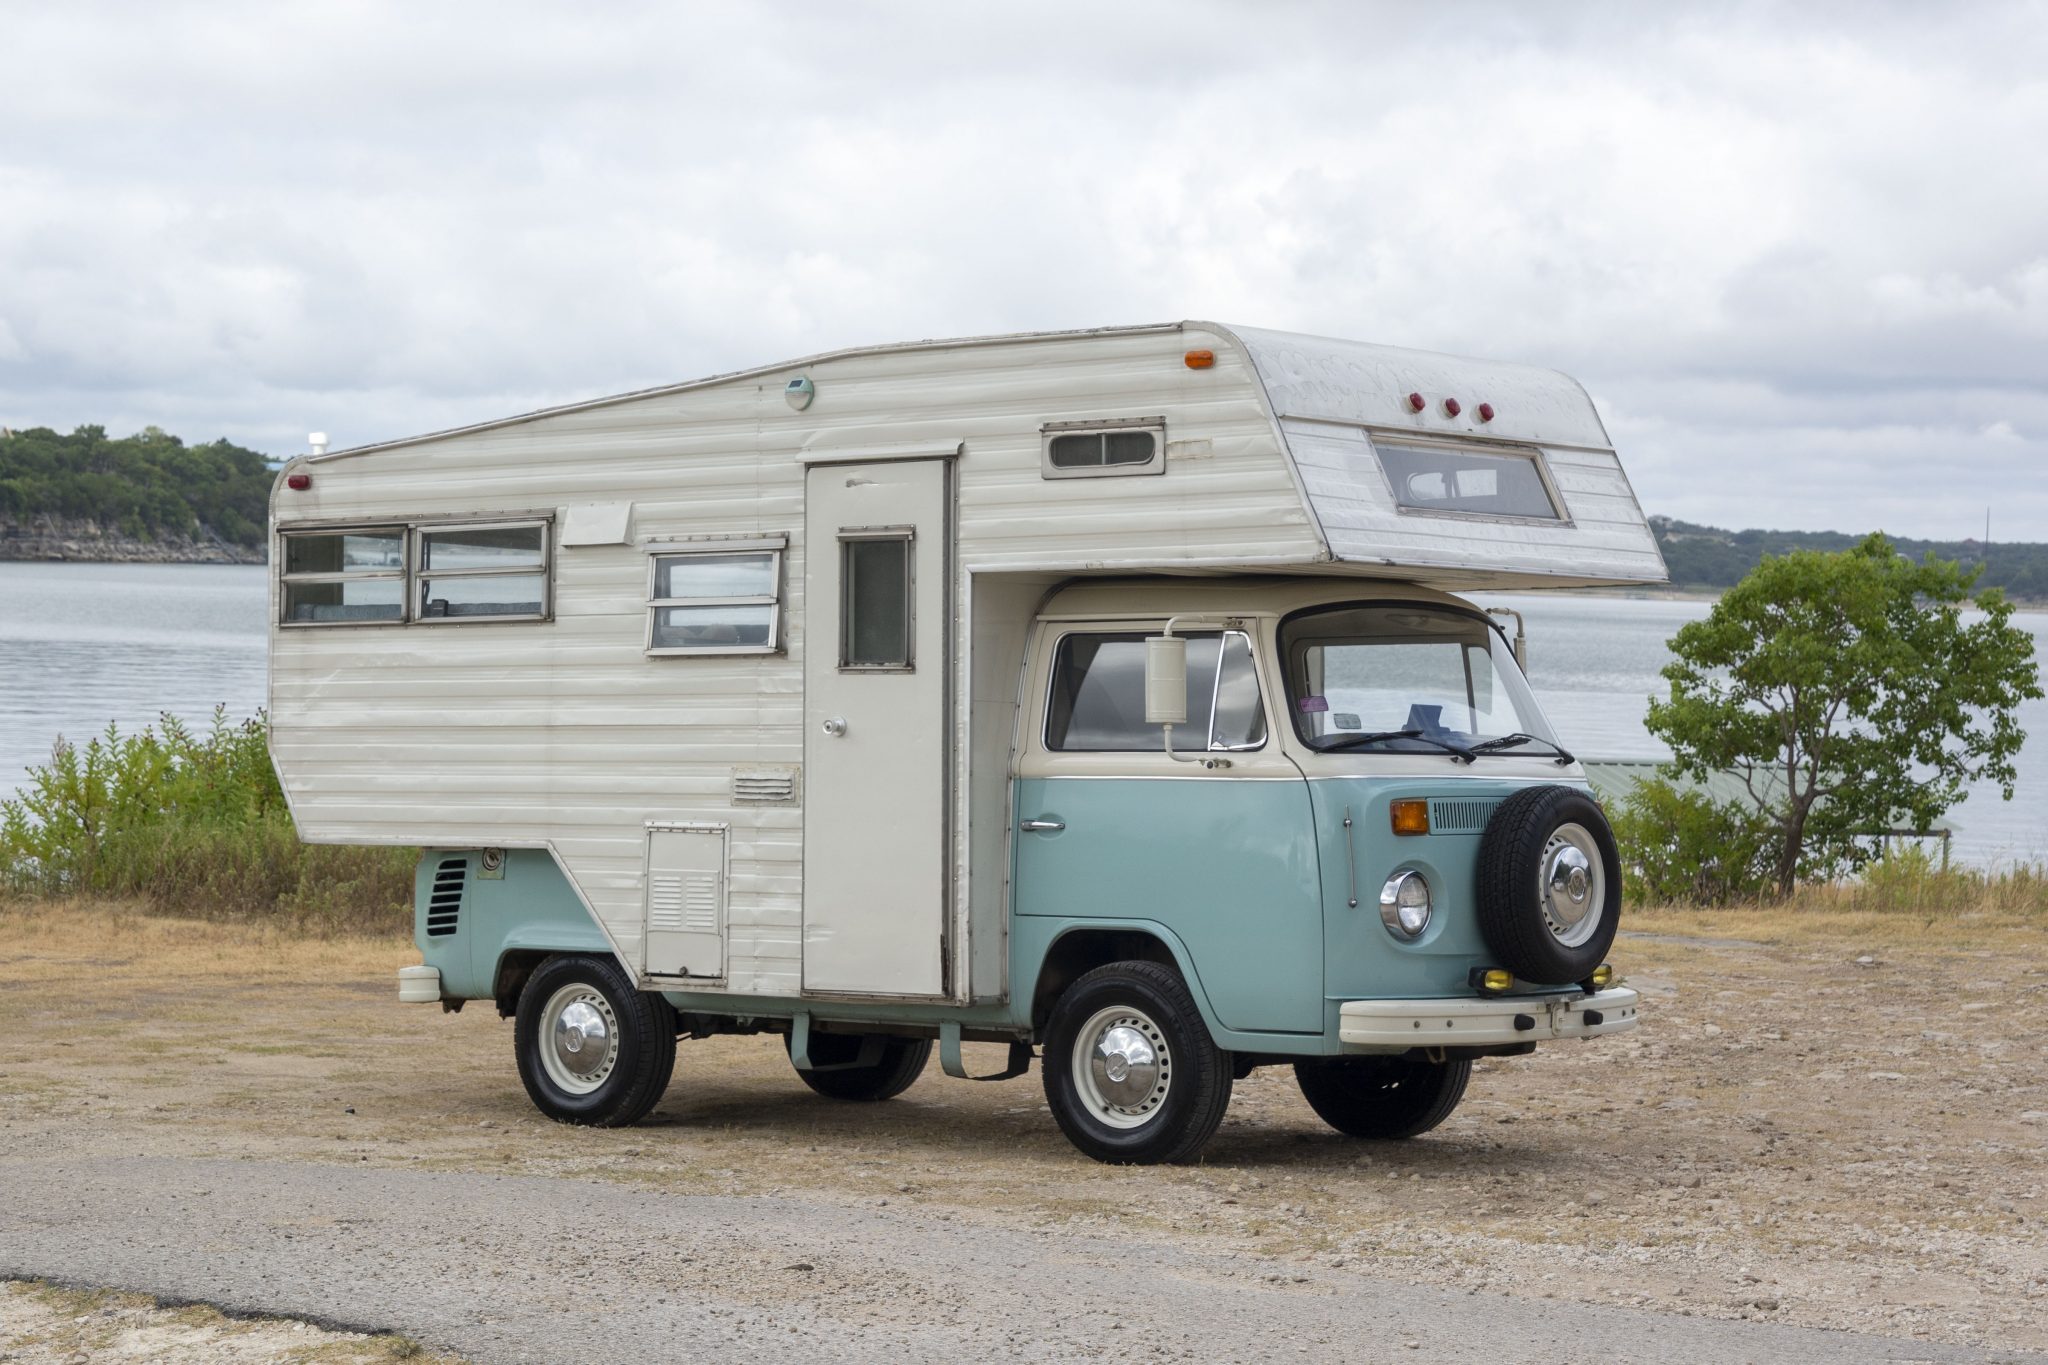 This Is A VW Camper Like You've Never Seen: